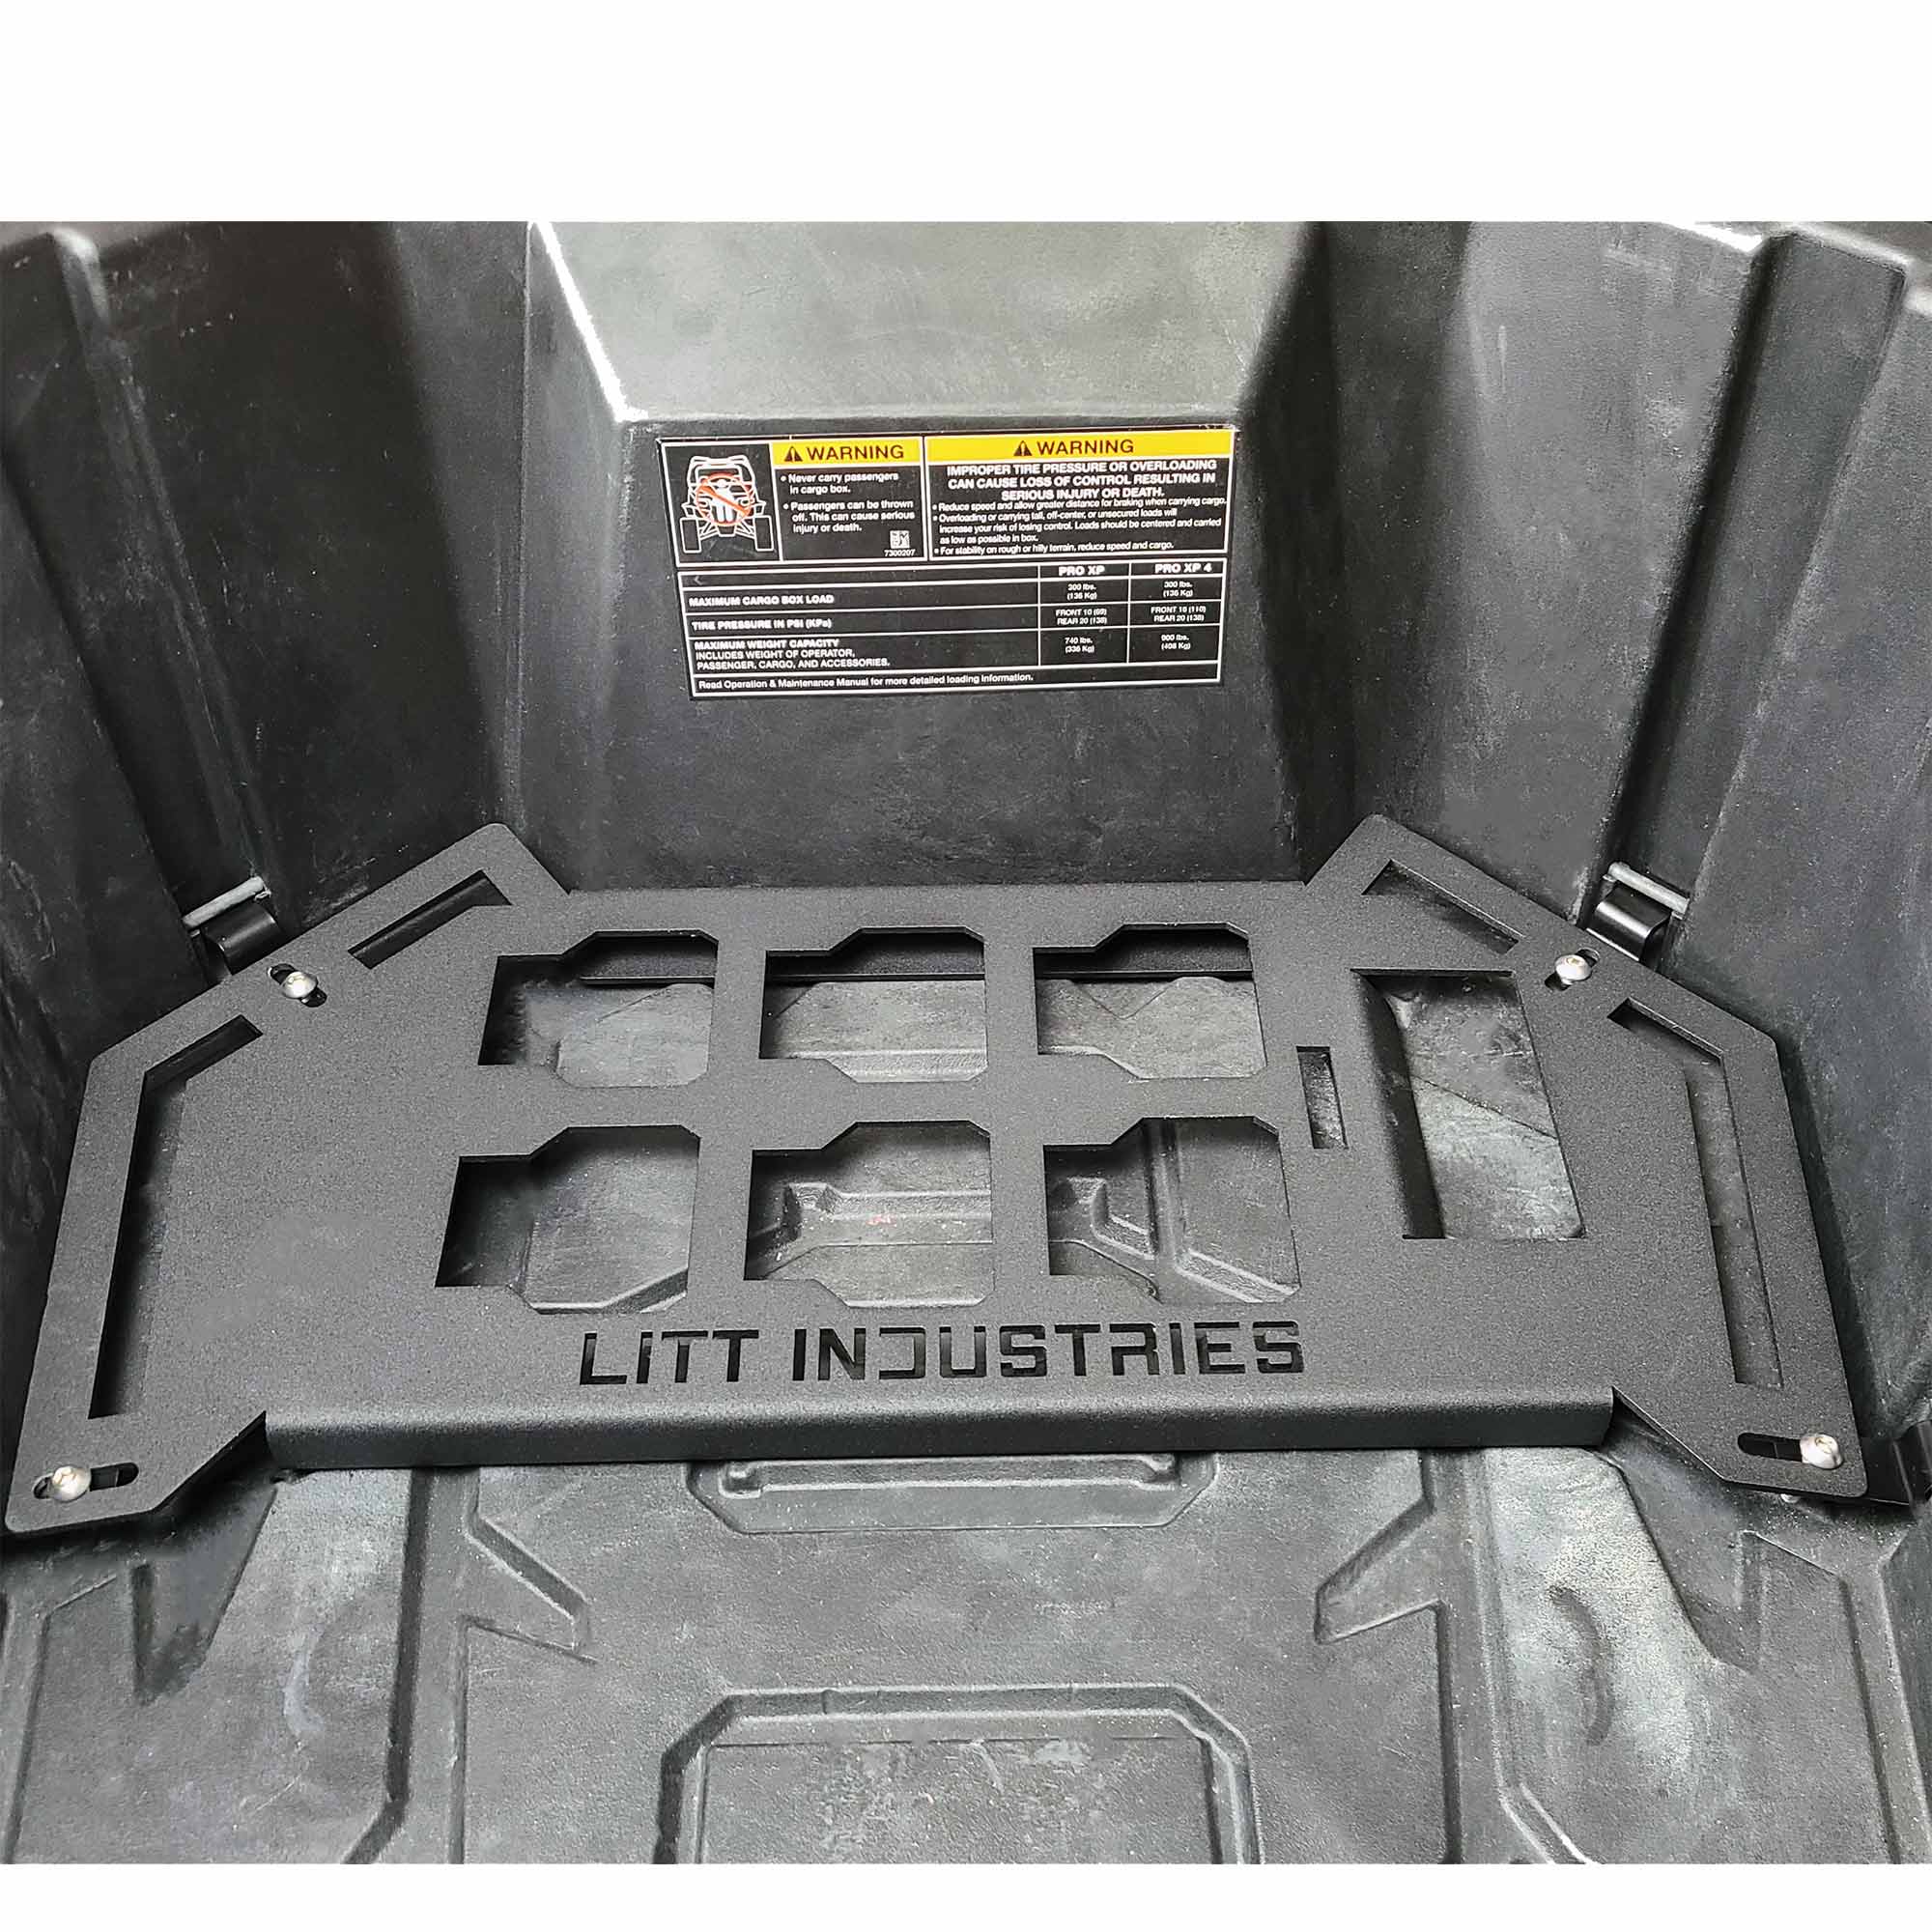 milwaukee packout toolbox or cooler mount plate dimensions aftermarket accessories utv half mount for polaris rzr pro xp or xp4 models by litt industries